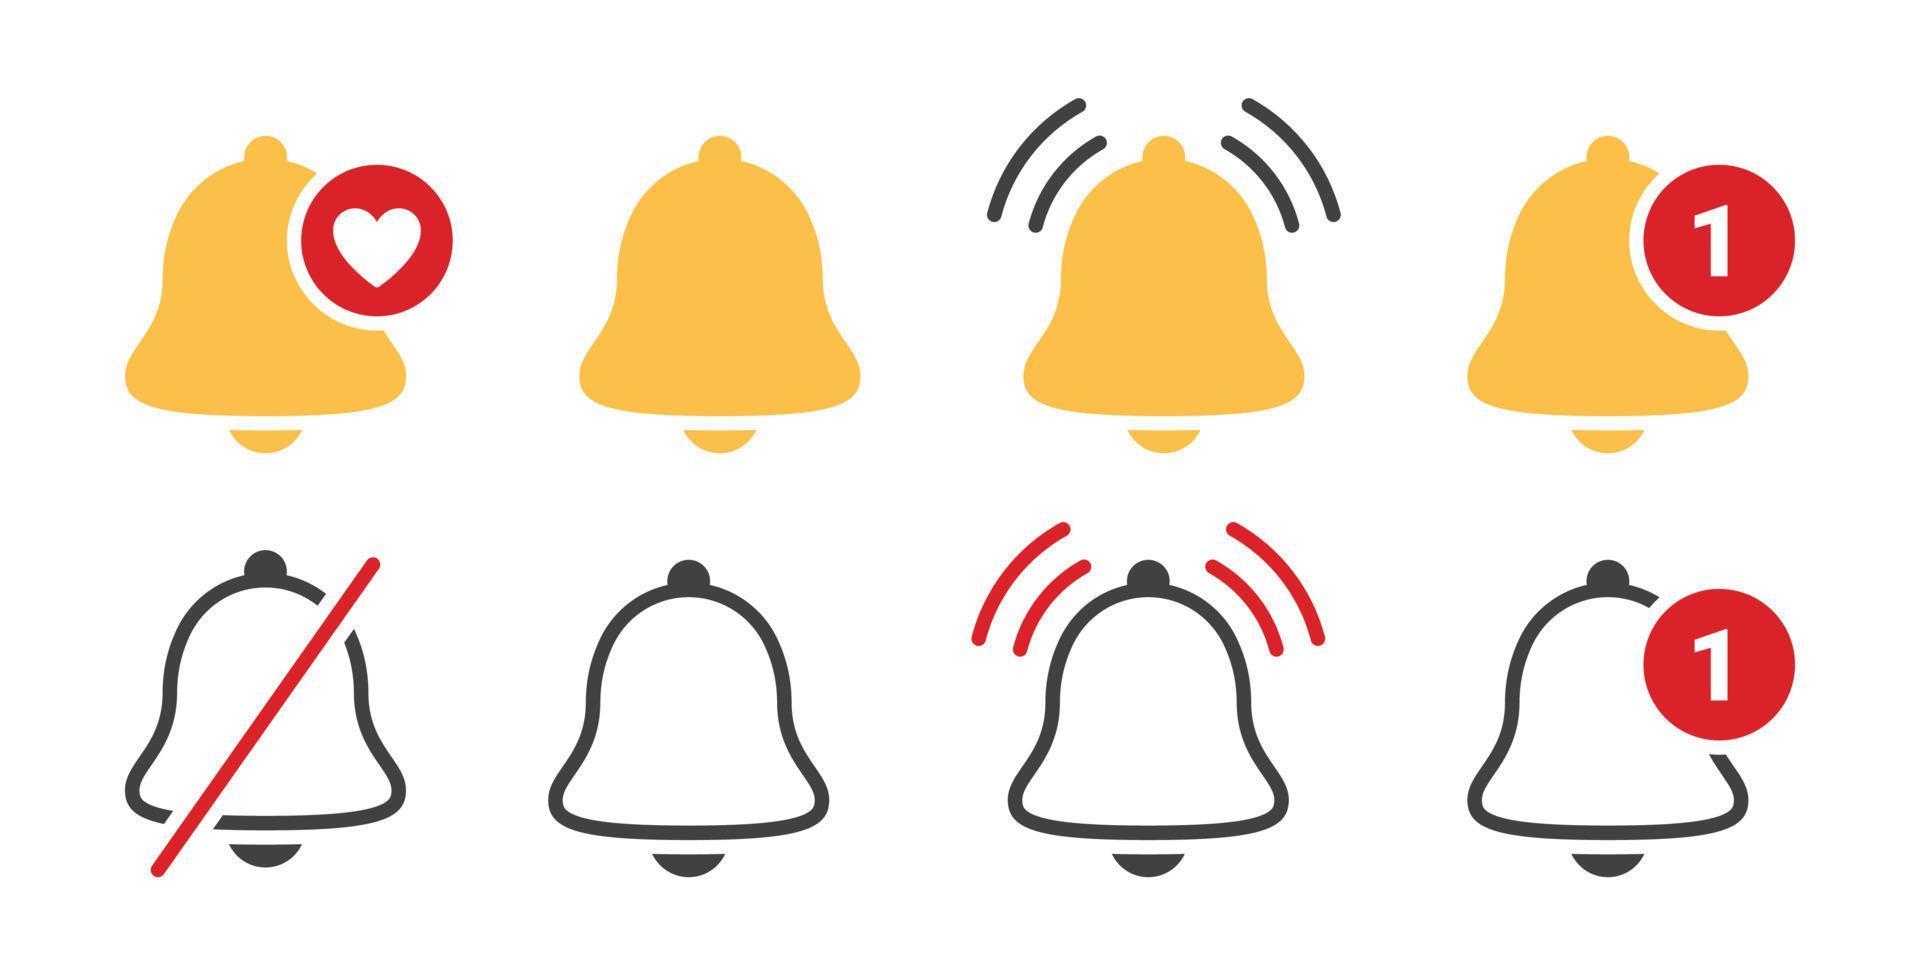 Notification bell icons. Incoming inbox message icons. Reminder icons. Vector icons